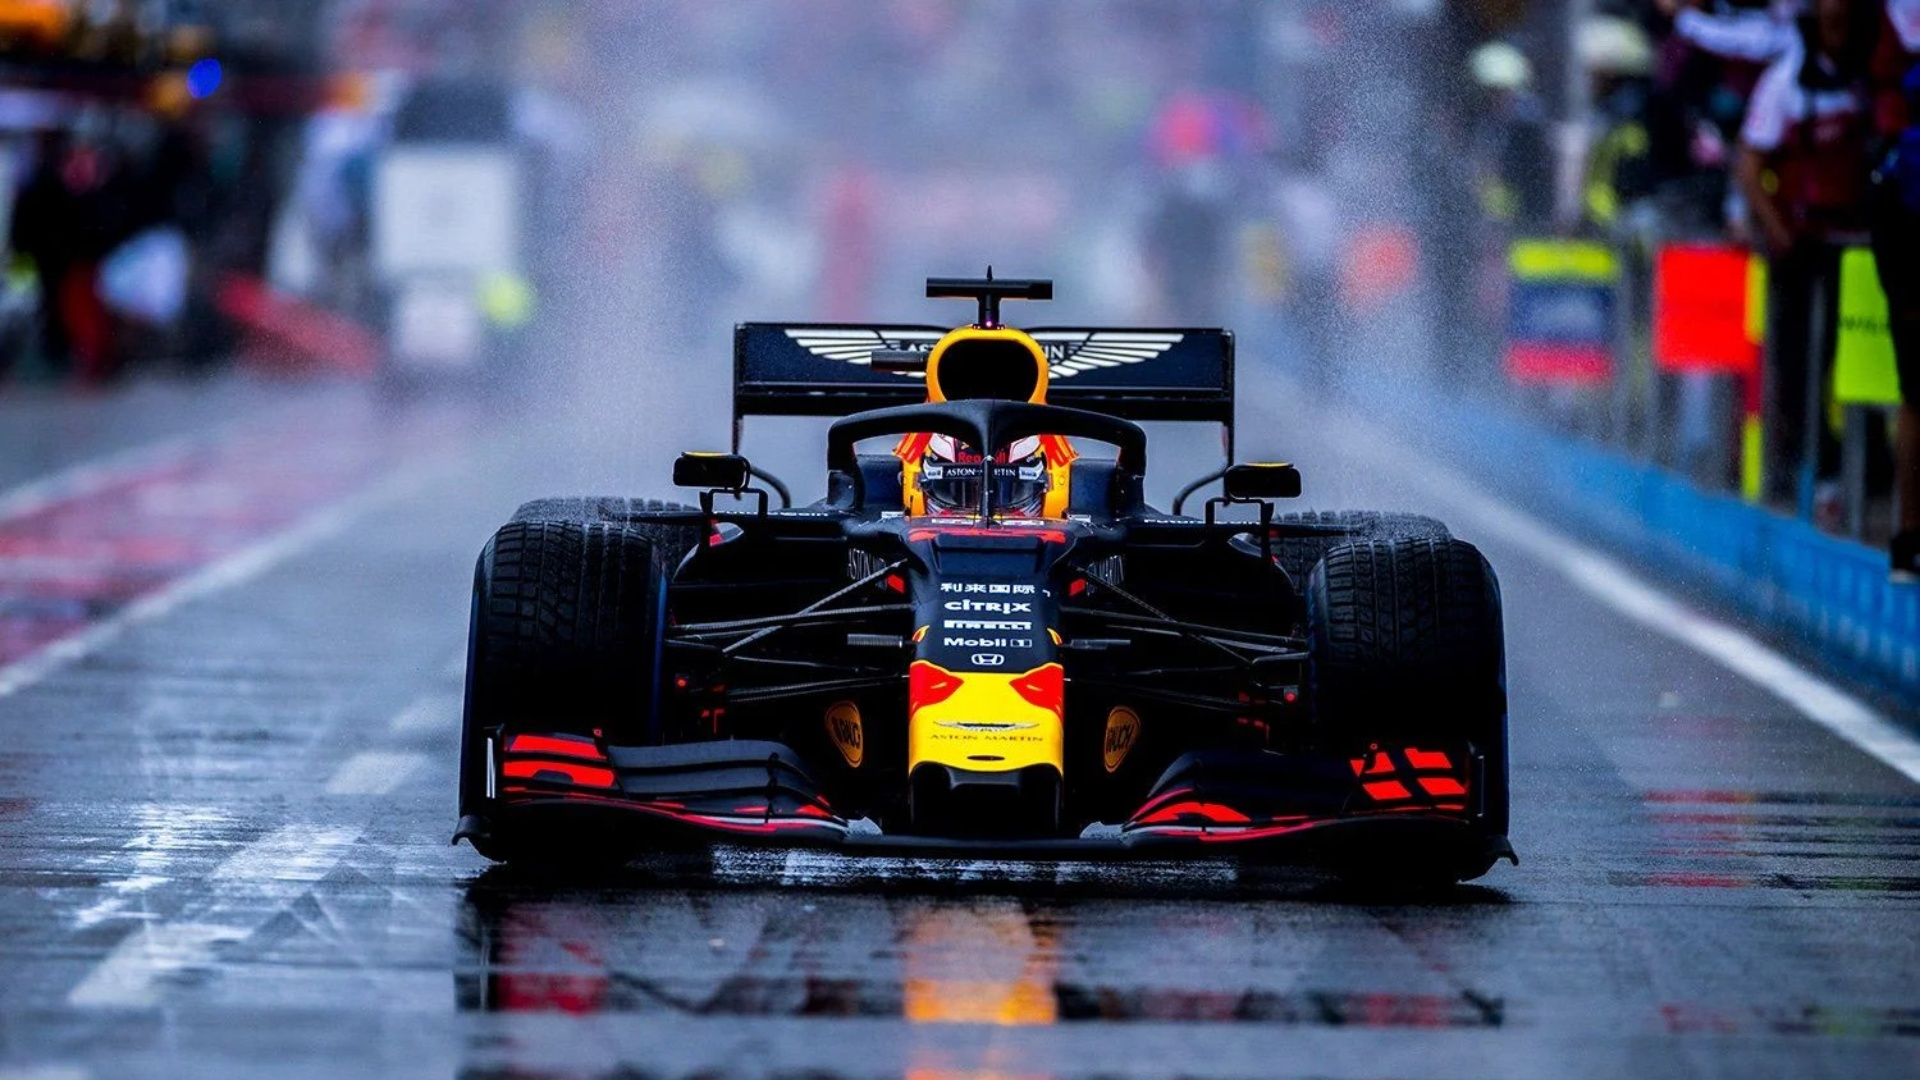 1920x1080 Top 45+ Red Bull F1 Racing Wallpapers [ New \u0026 Latest